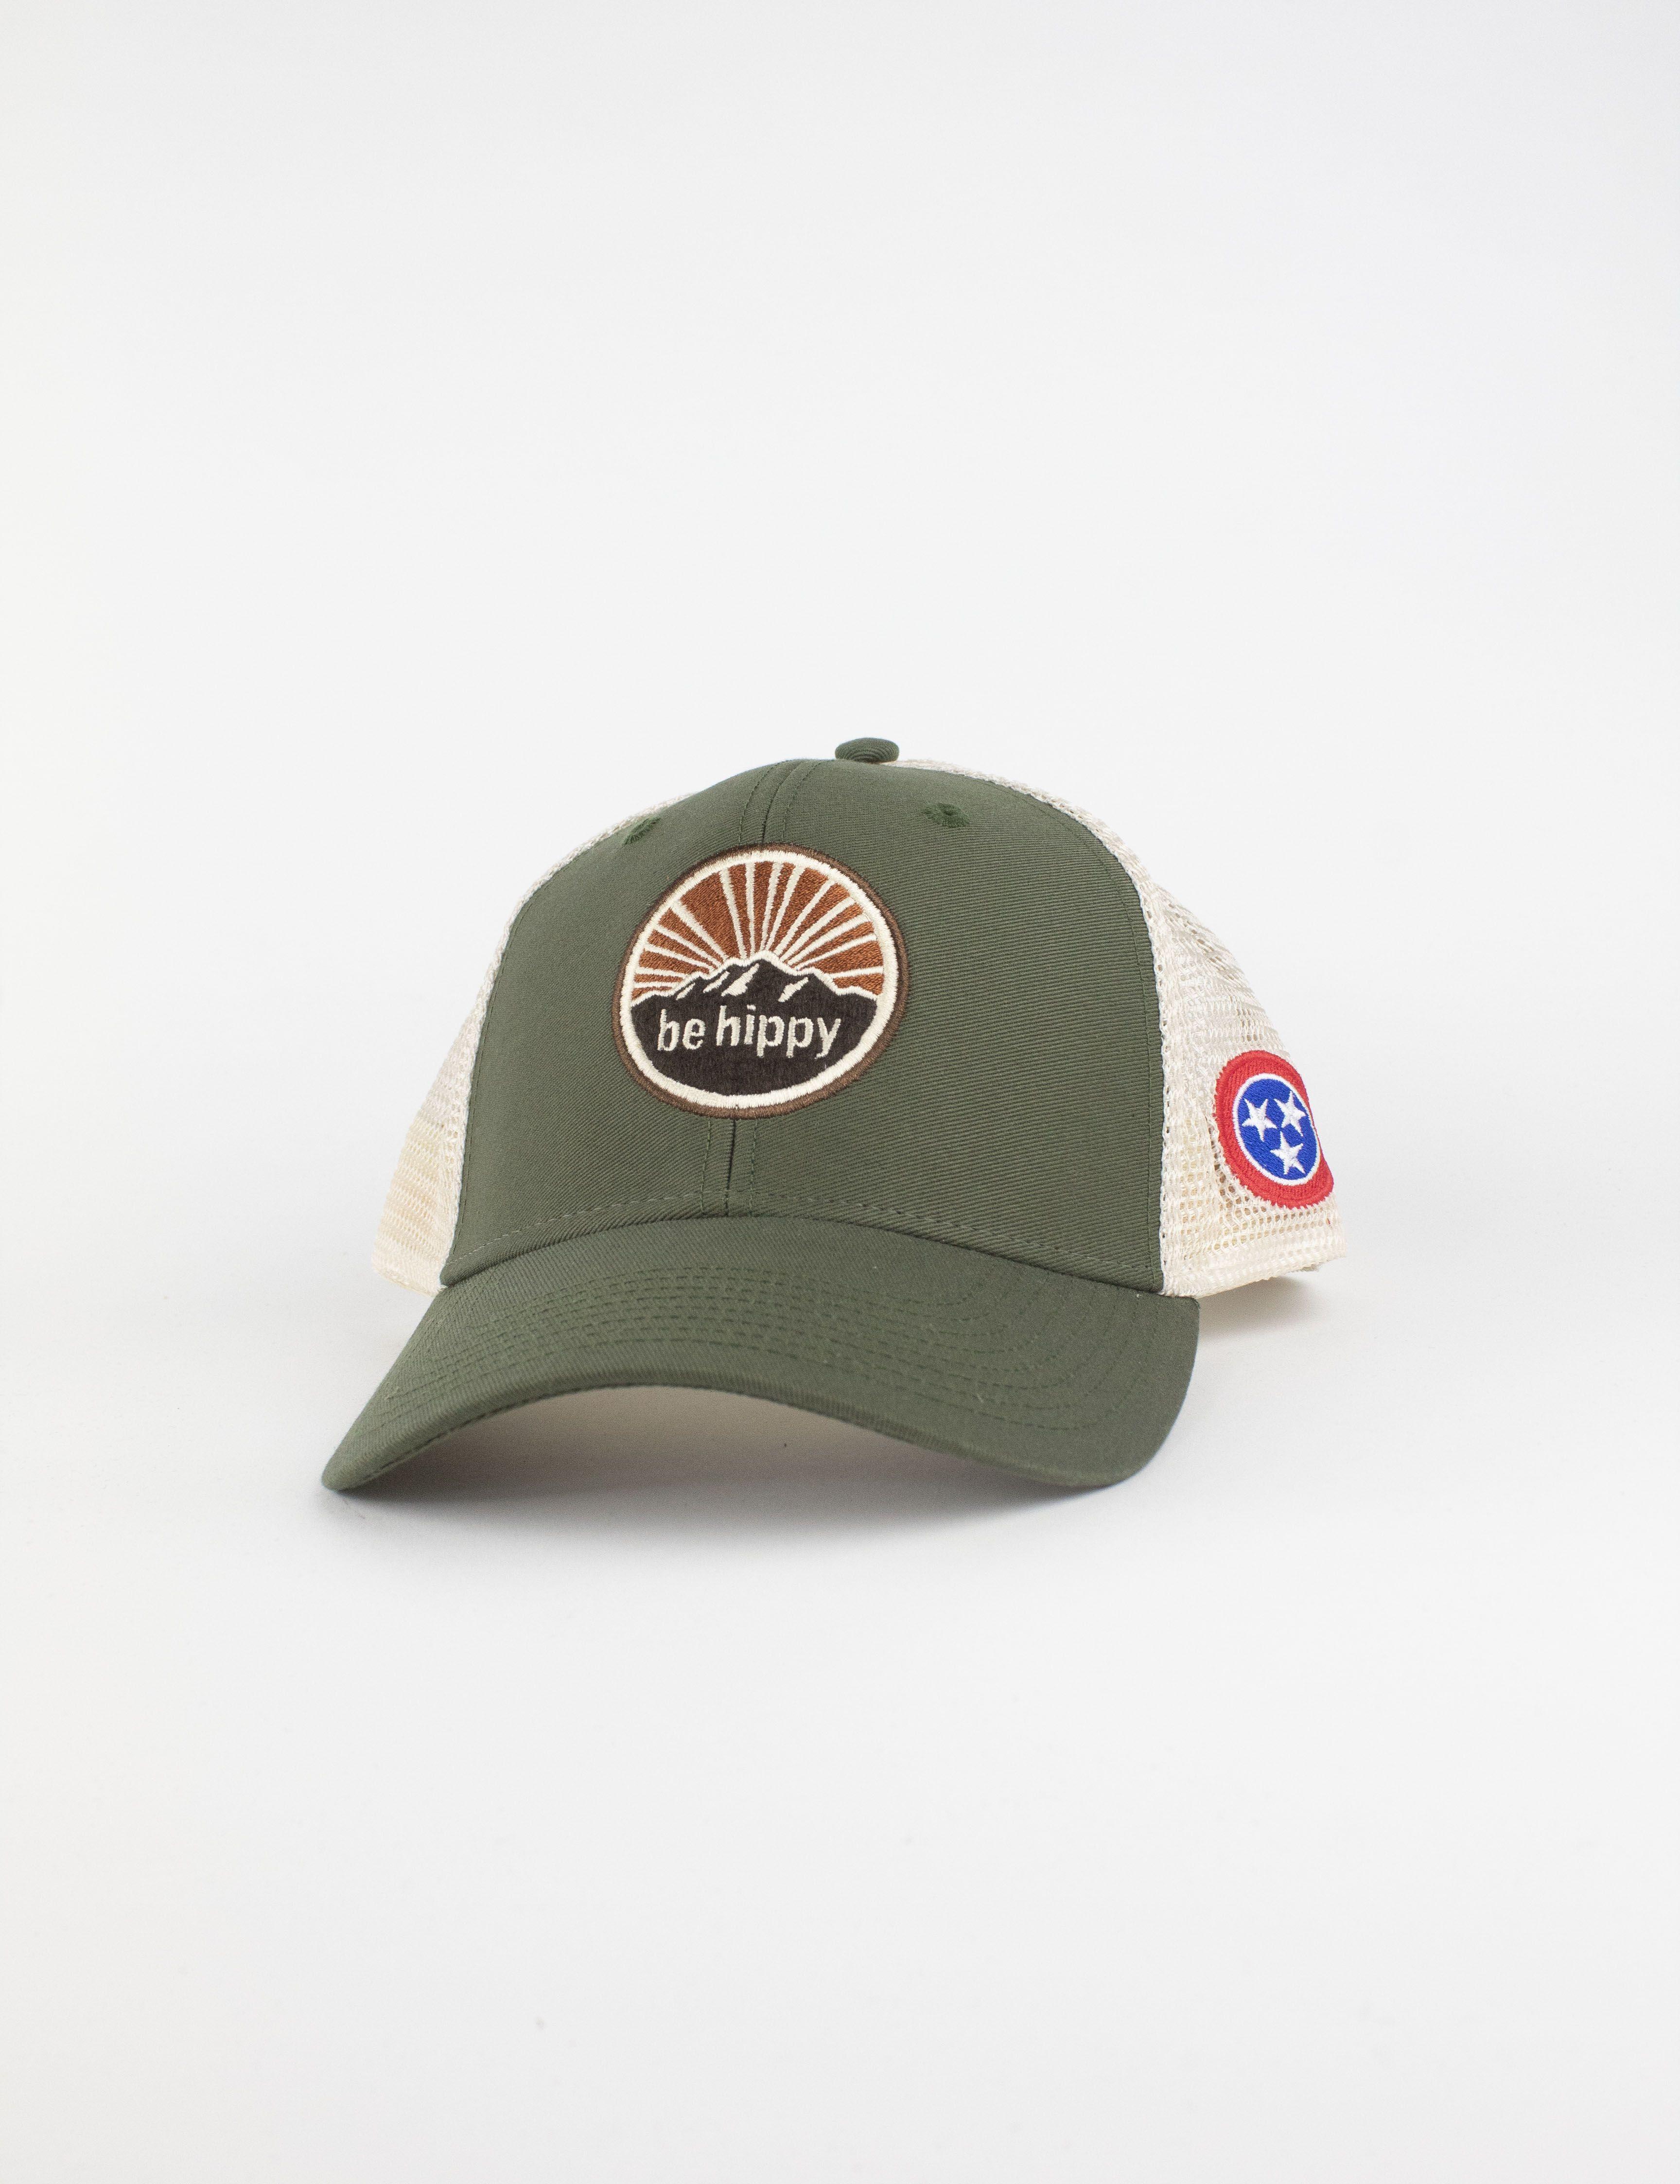 Tennessee Mountain Logo - mountain logo trucker hat – Tennessee flag | be hippy